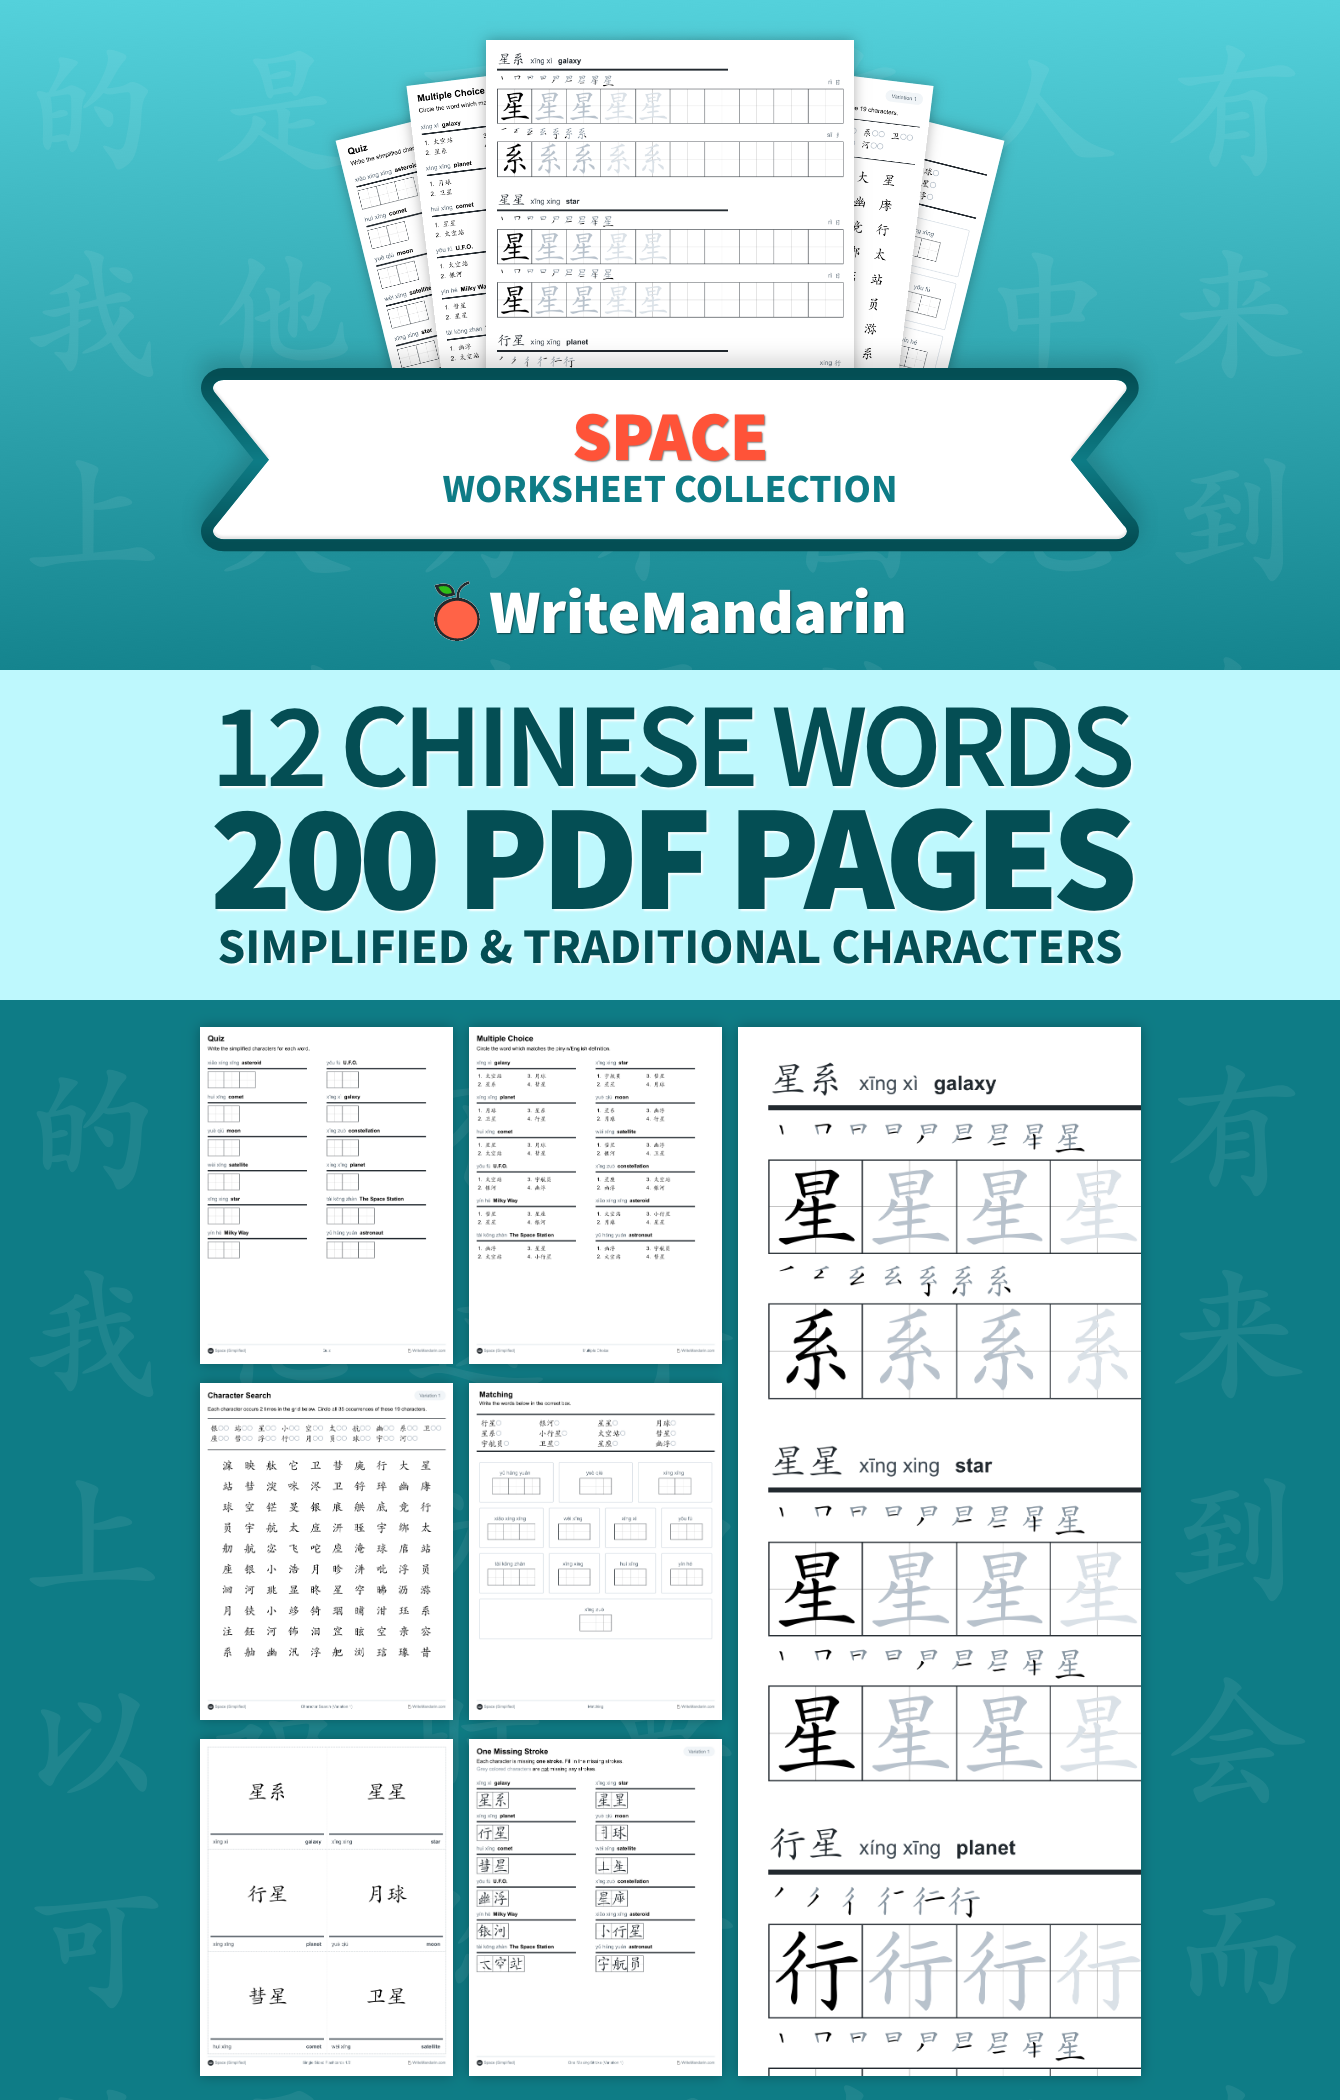 Preview image of Space worksheet collection